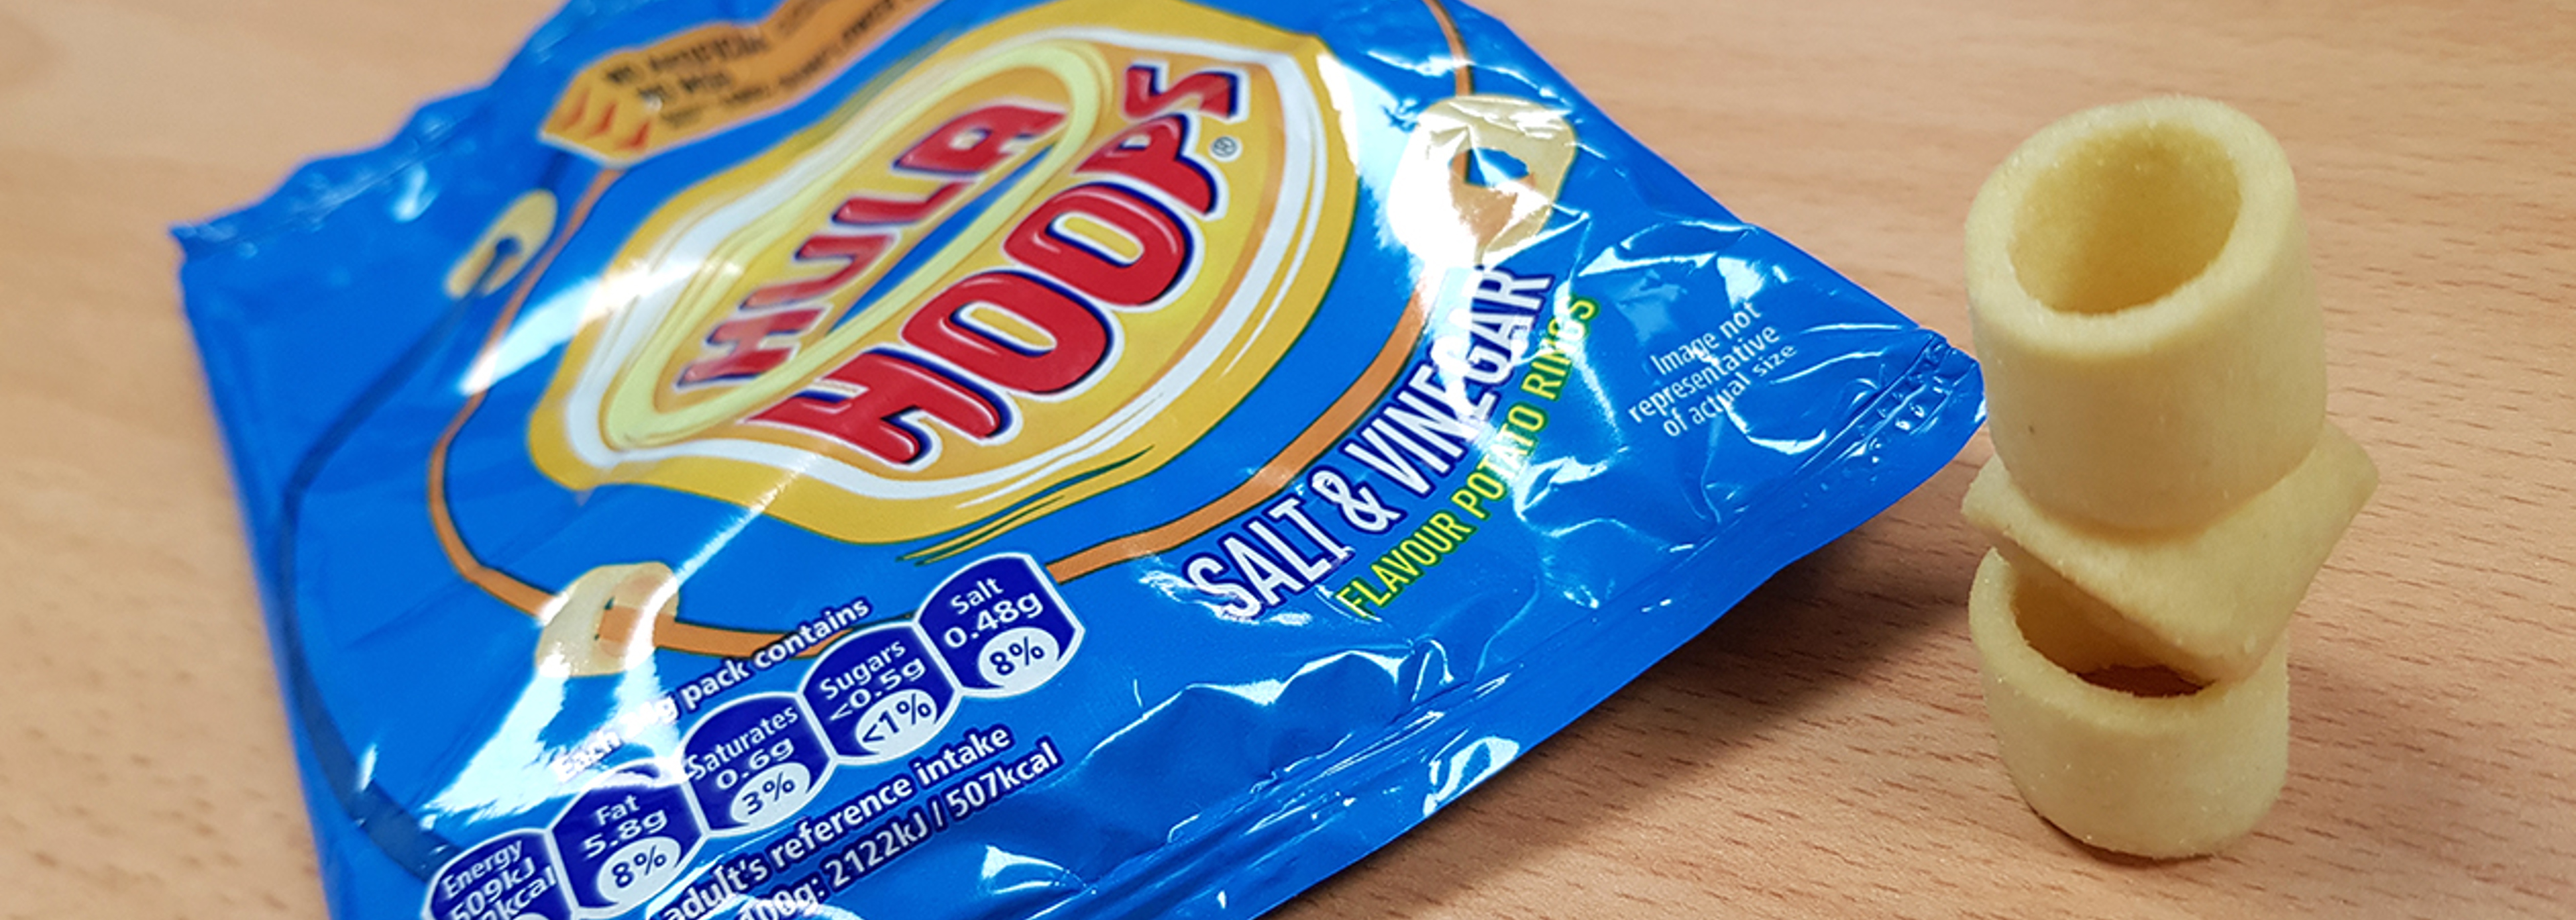 Hula Hoops factory not a public health concern, say EHPs